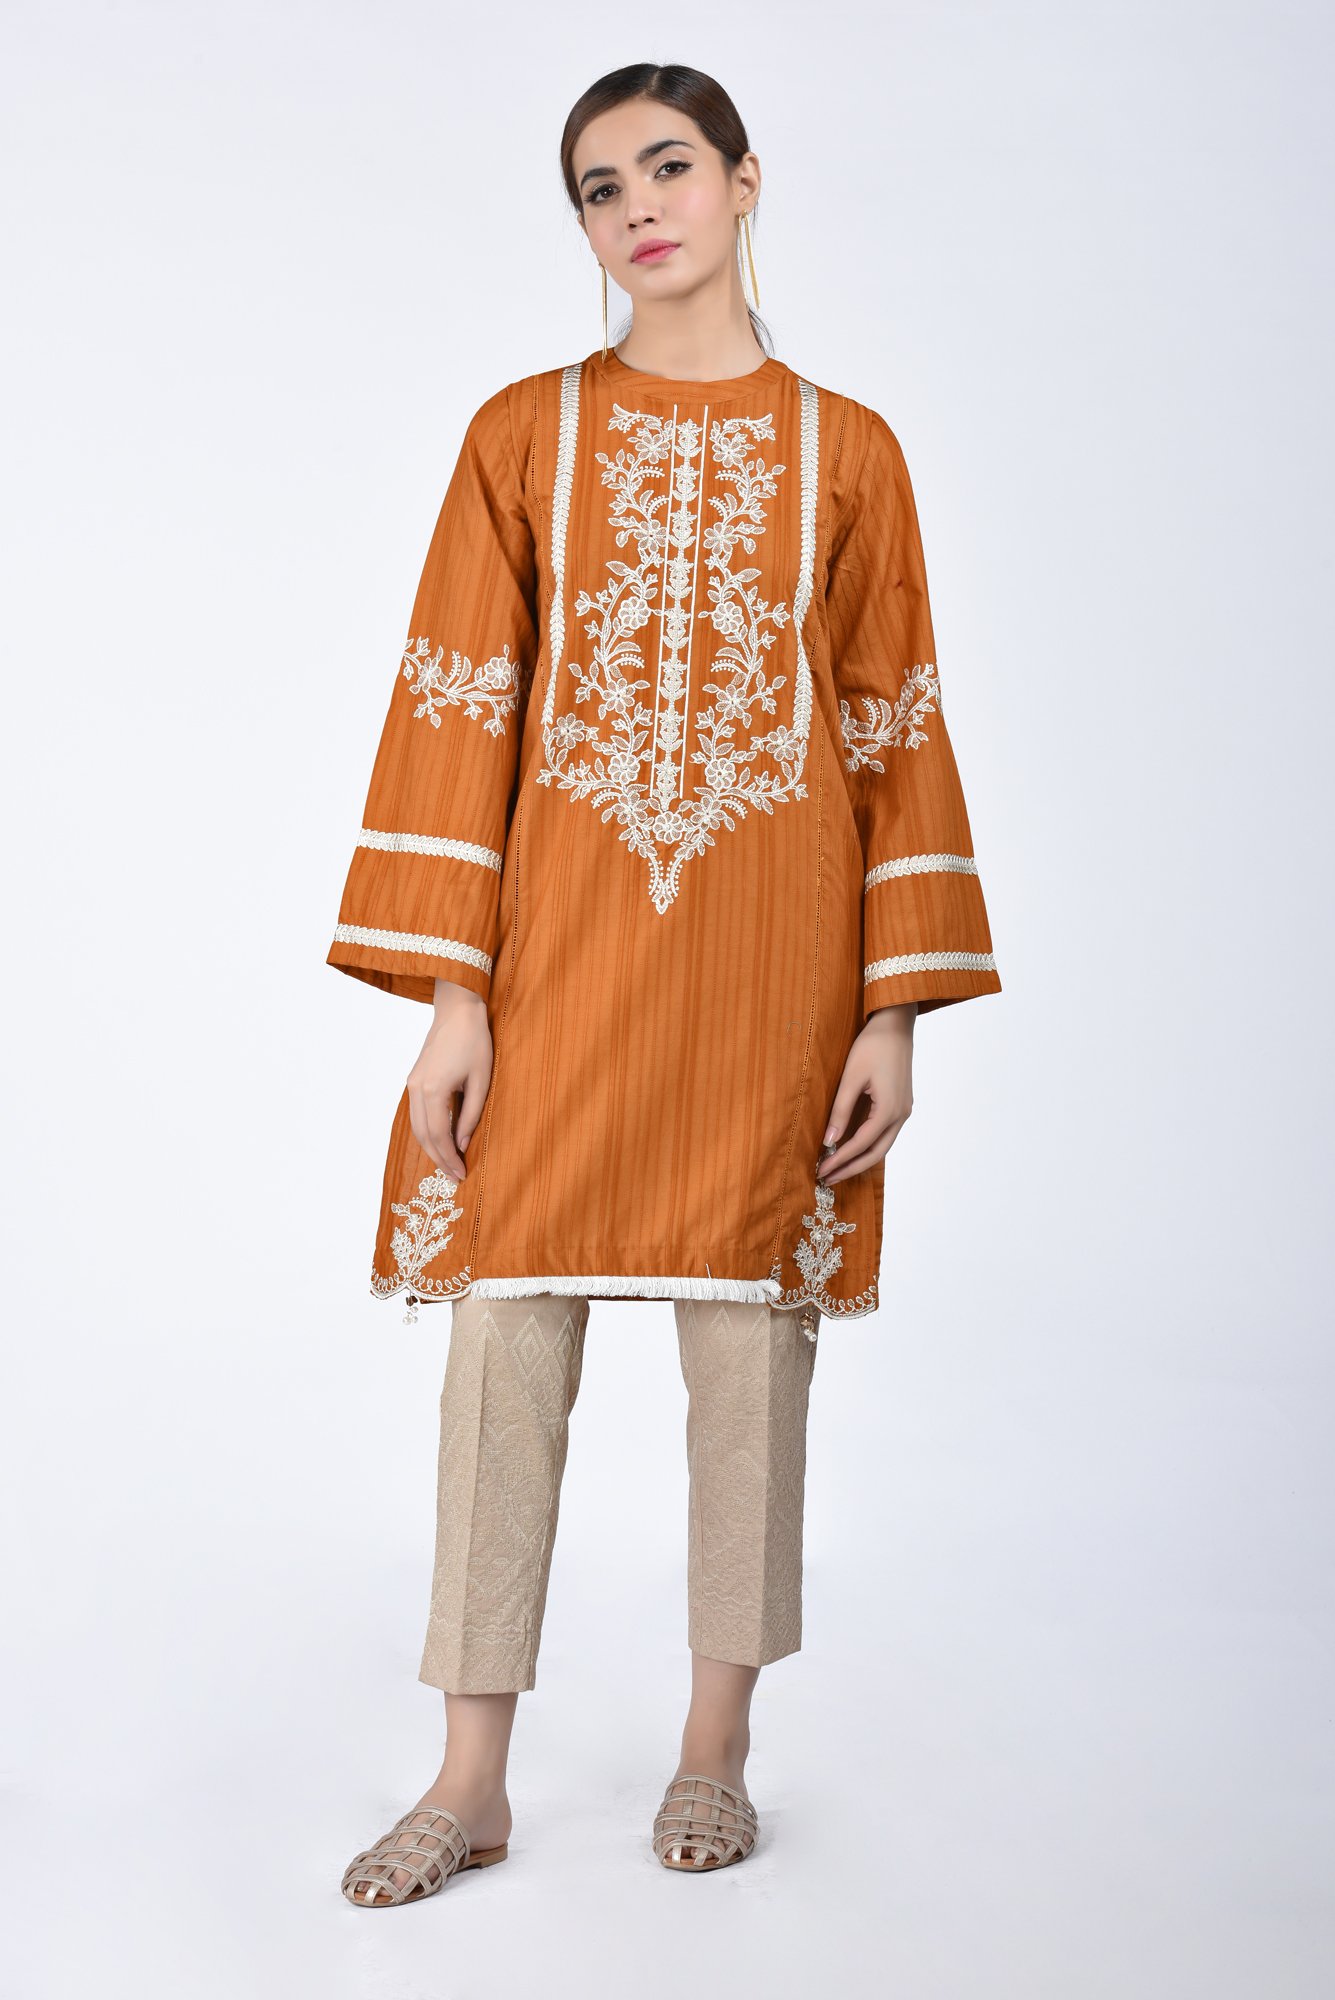 /2018/12/ethnic-by-outfitters-rozana-shirt-wtr481083-10185123-ep-222-image1.jpeg